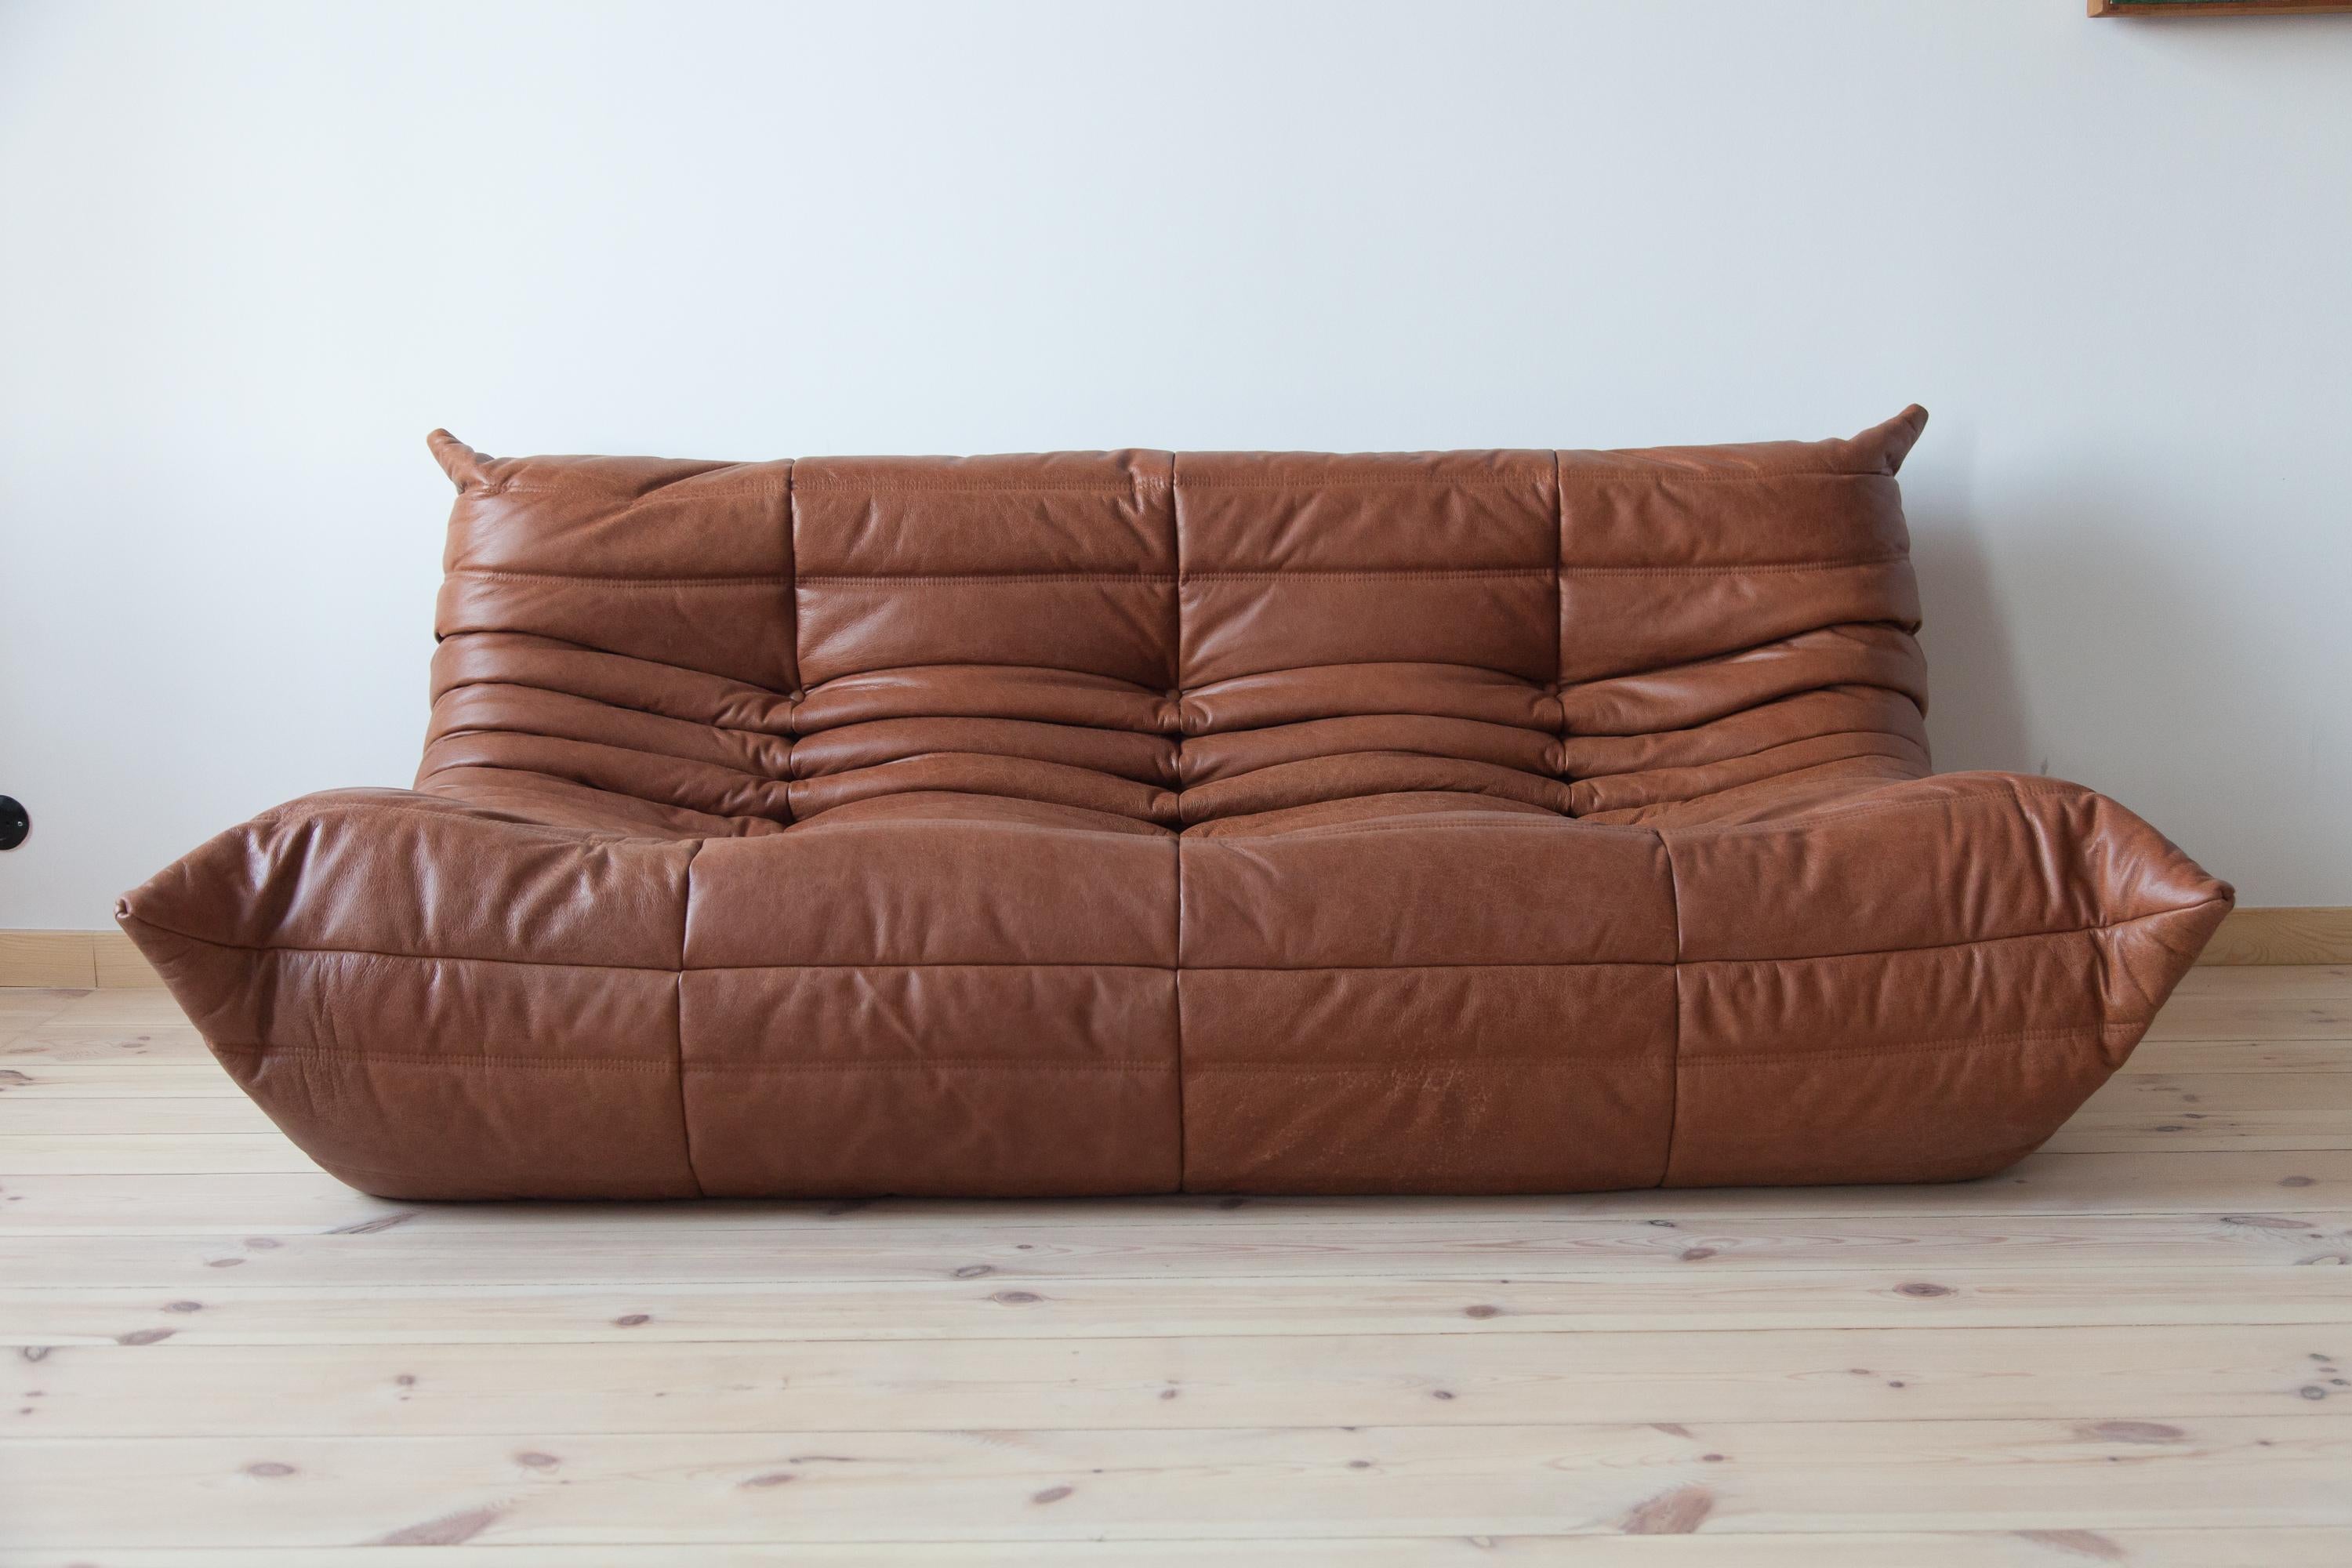 This Togo three-seat sofa was designed by Michel Ducaroy in 1973 and was manufactured by Ligne Roset in France. It has been reupholstered in new Kentucky brown leather (70 x 174 x 102 cm). It has the original Ligne Roset logo and genuine Ligne Roset